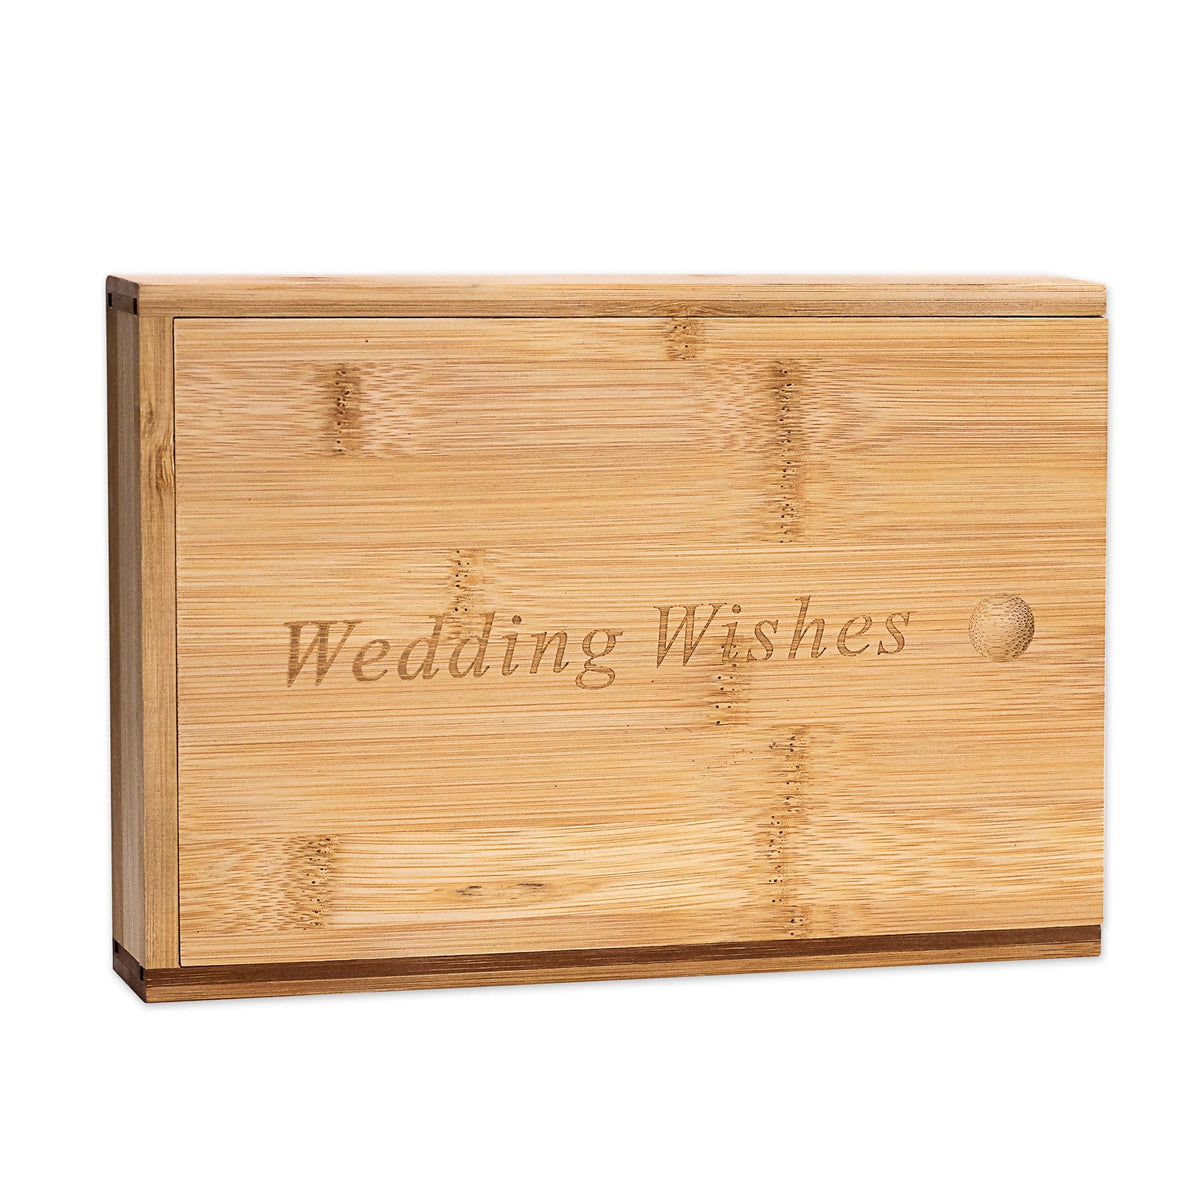 Wedding Wishes Box - Bamboo, Wedding Gifts, Small Gift Boxes, Small Wooden Box, Vintage Decor, Gift Card Holder, Gift Card Box, Money Box, Place Cards, Keepsake Boxes, Boho Home Decor - Mrs... At Last!™